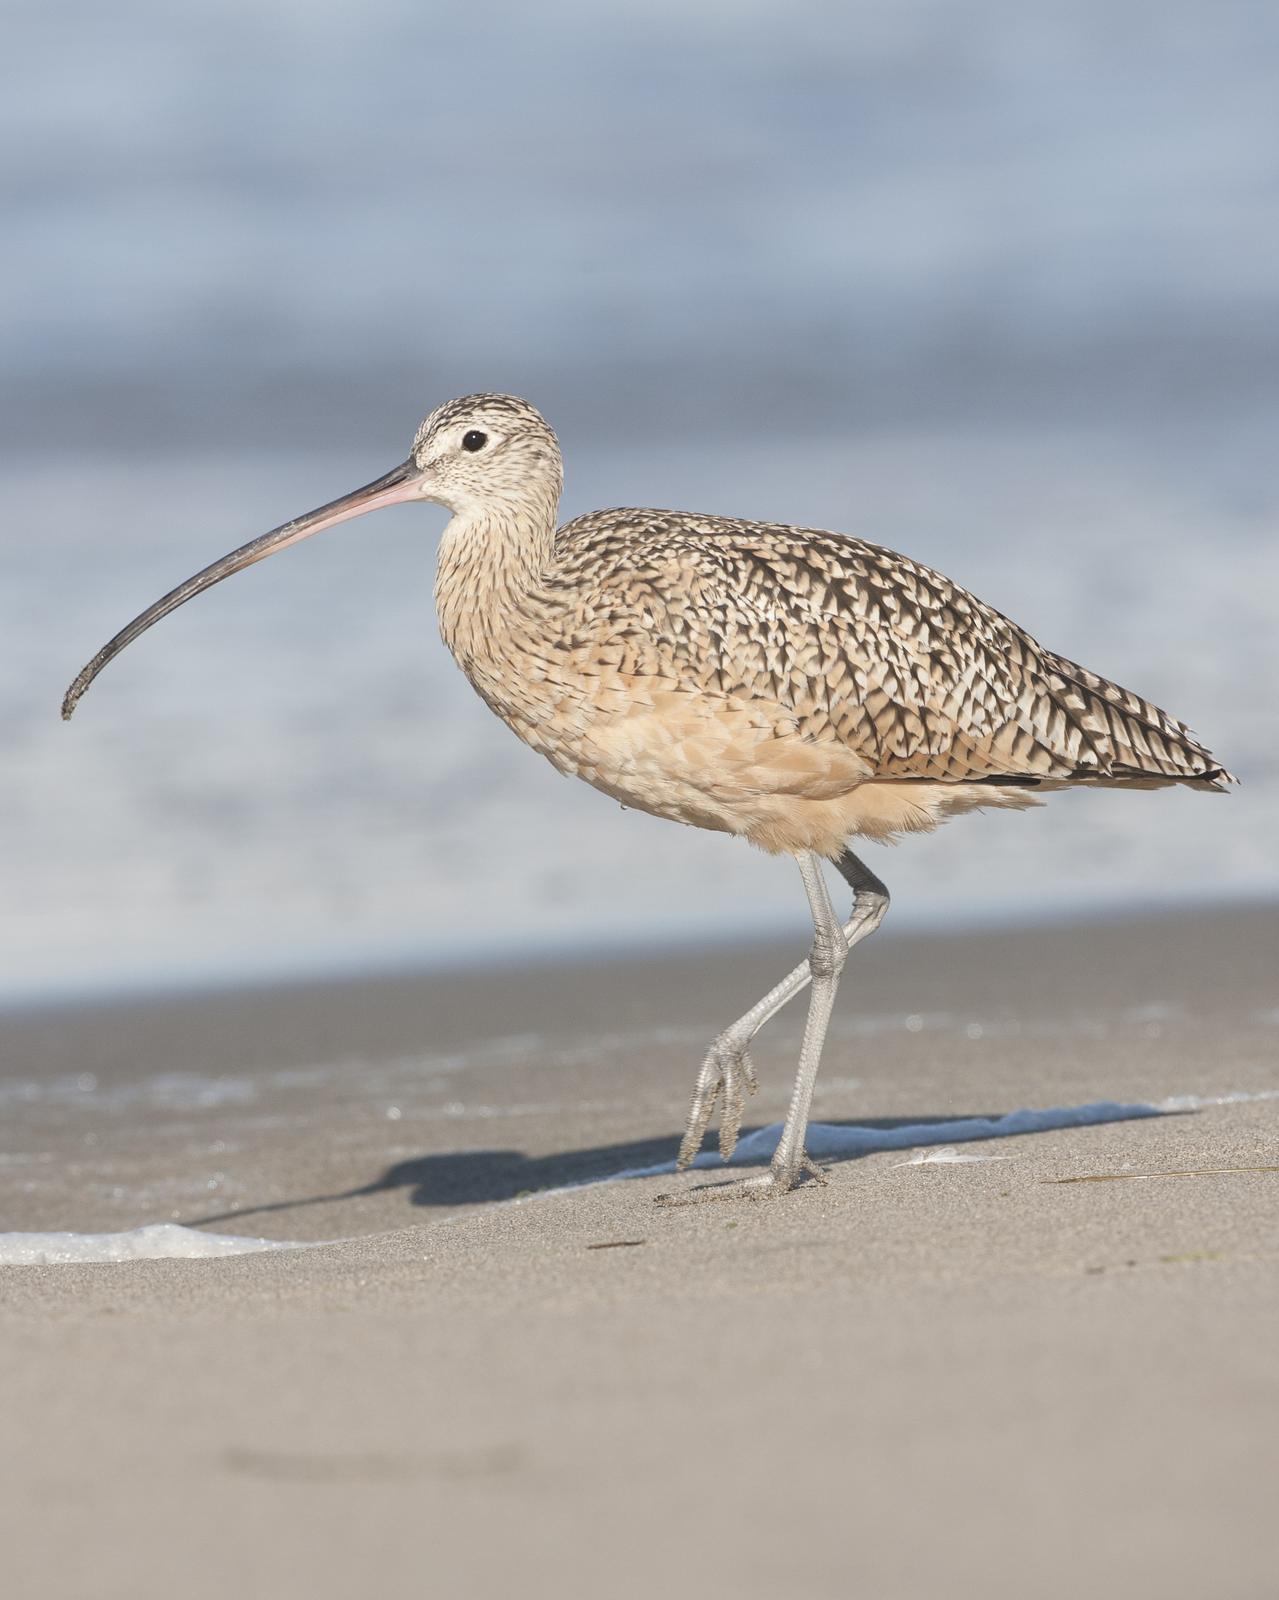 Long-billed Curlew Photo by Jeff Moore